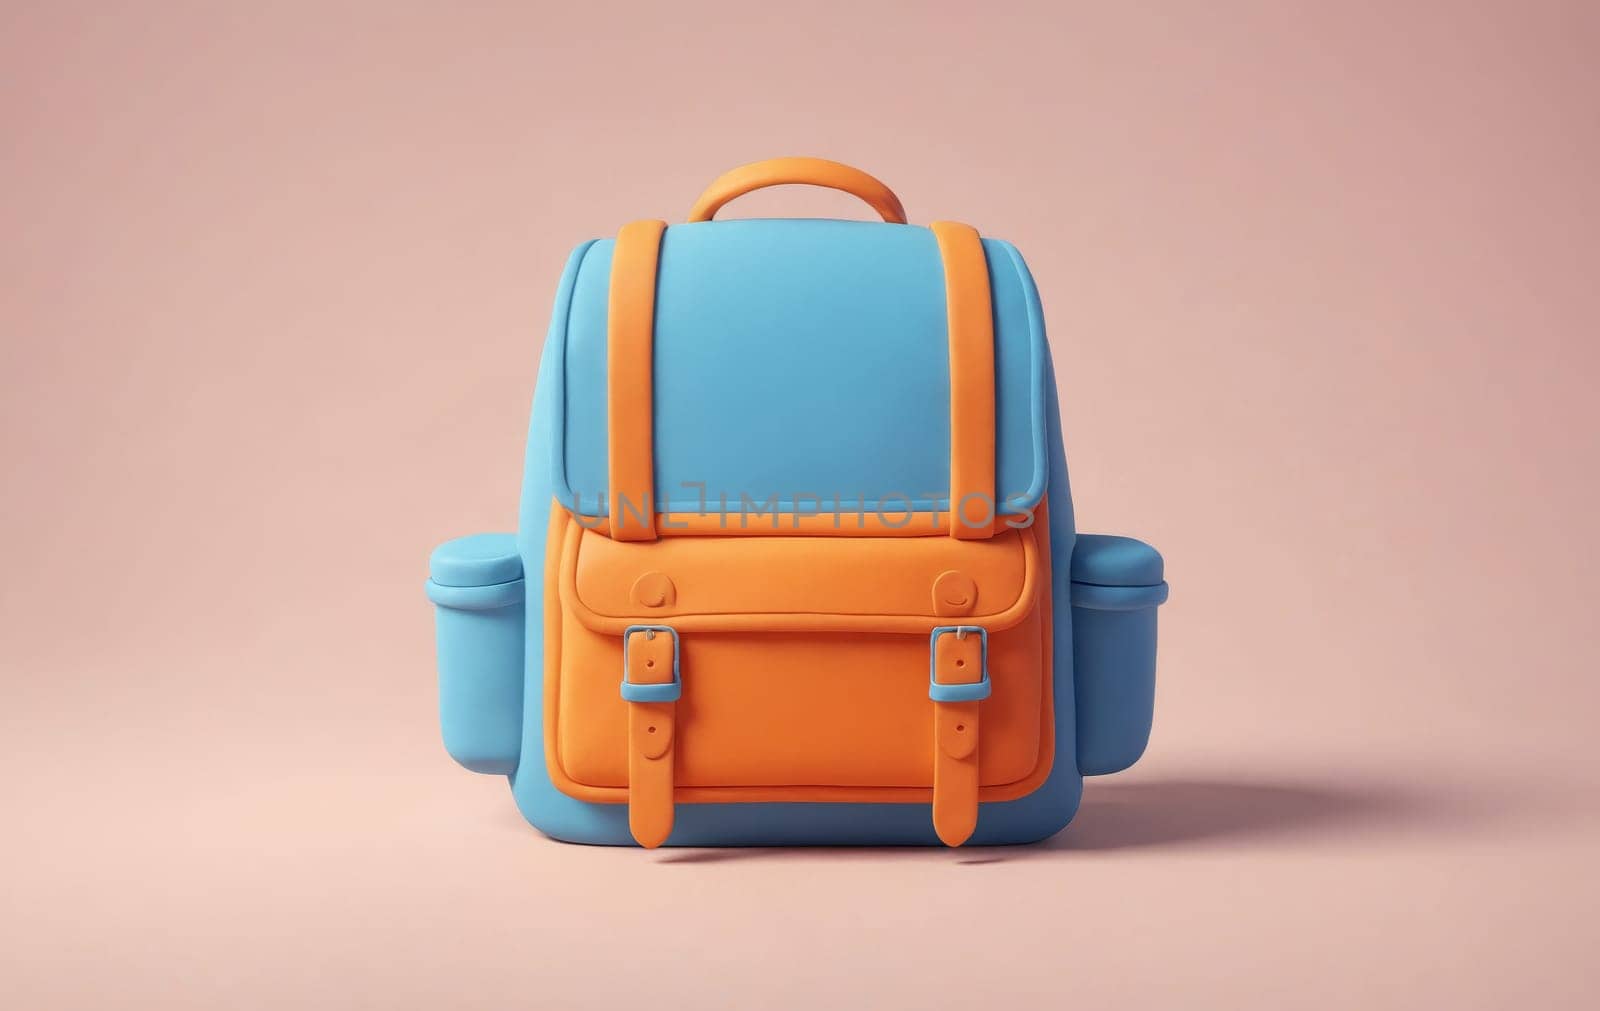 Trendy Cyan and Orange Backpack on Clear Background by Andre1ns